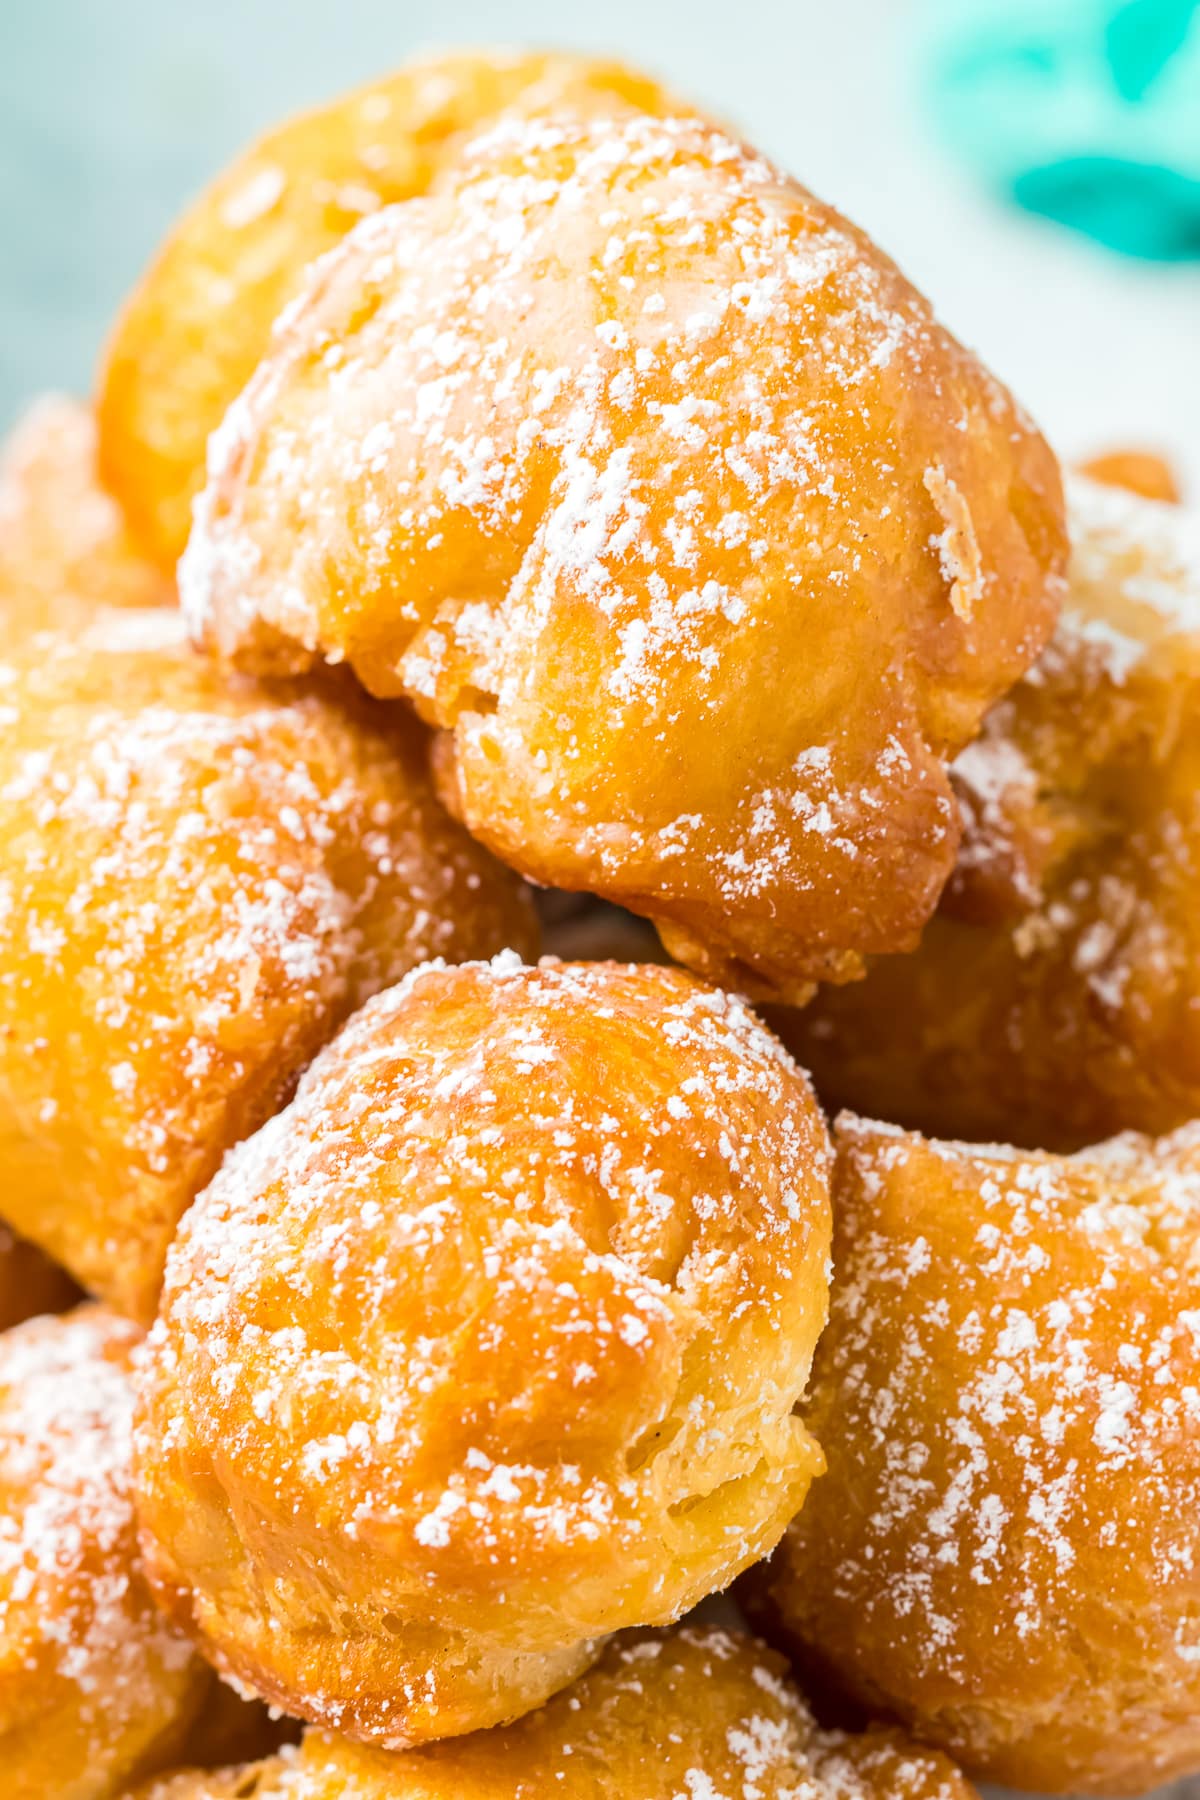 upclose image of donut holes with powdered sugar on top